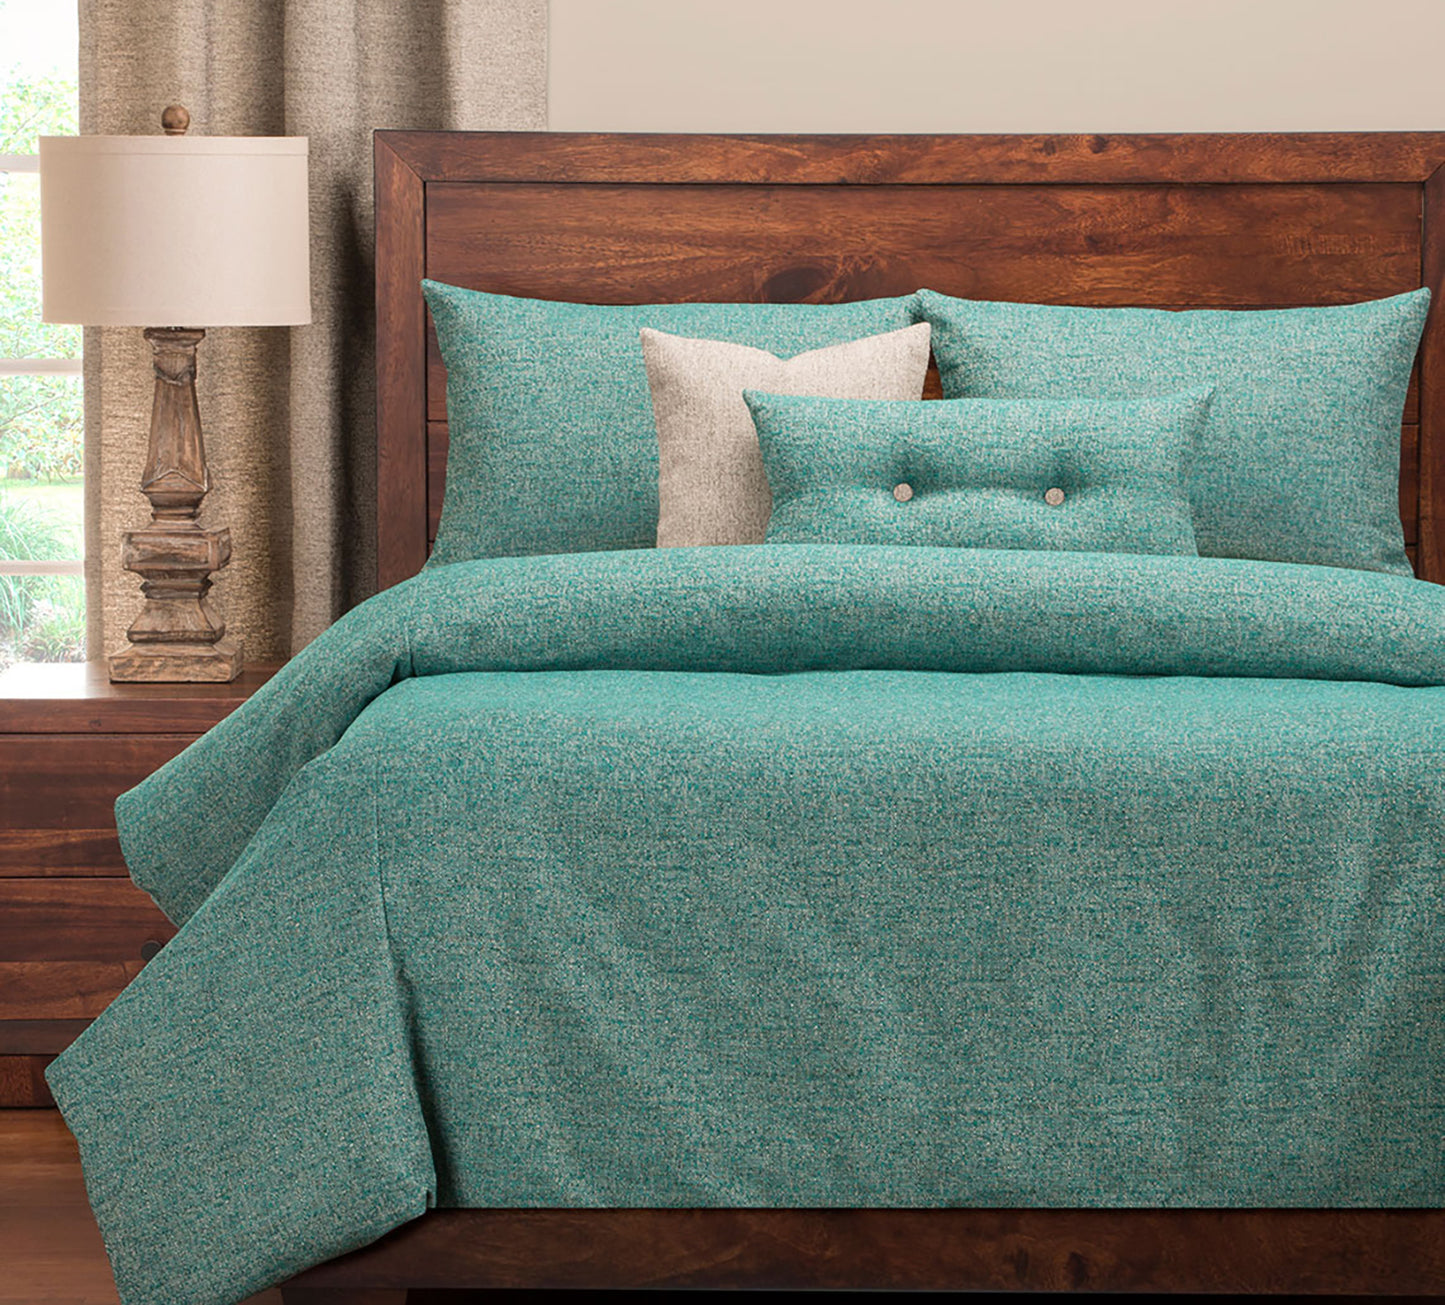 Belmont Turquoise 6 Piece Queen Luxury Duvet Cover and Insert Set